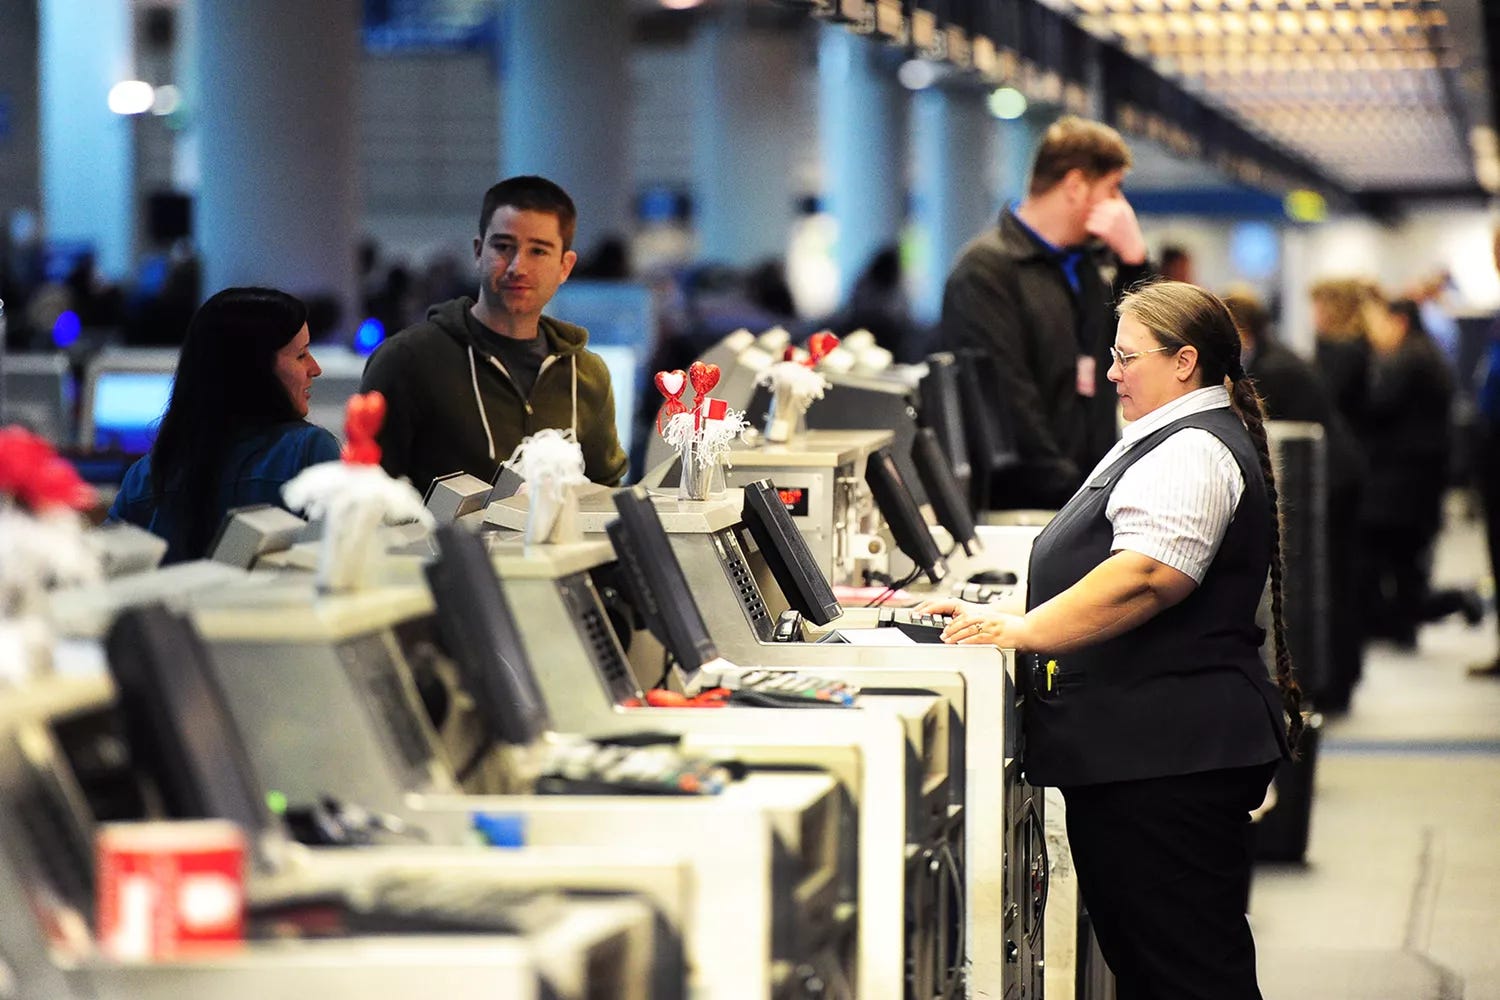 These U.S. Airports Have the Most (and Least) Friendliest Staffs